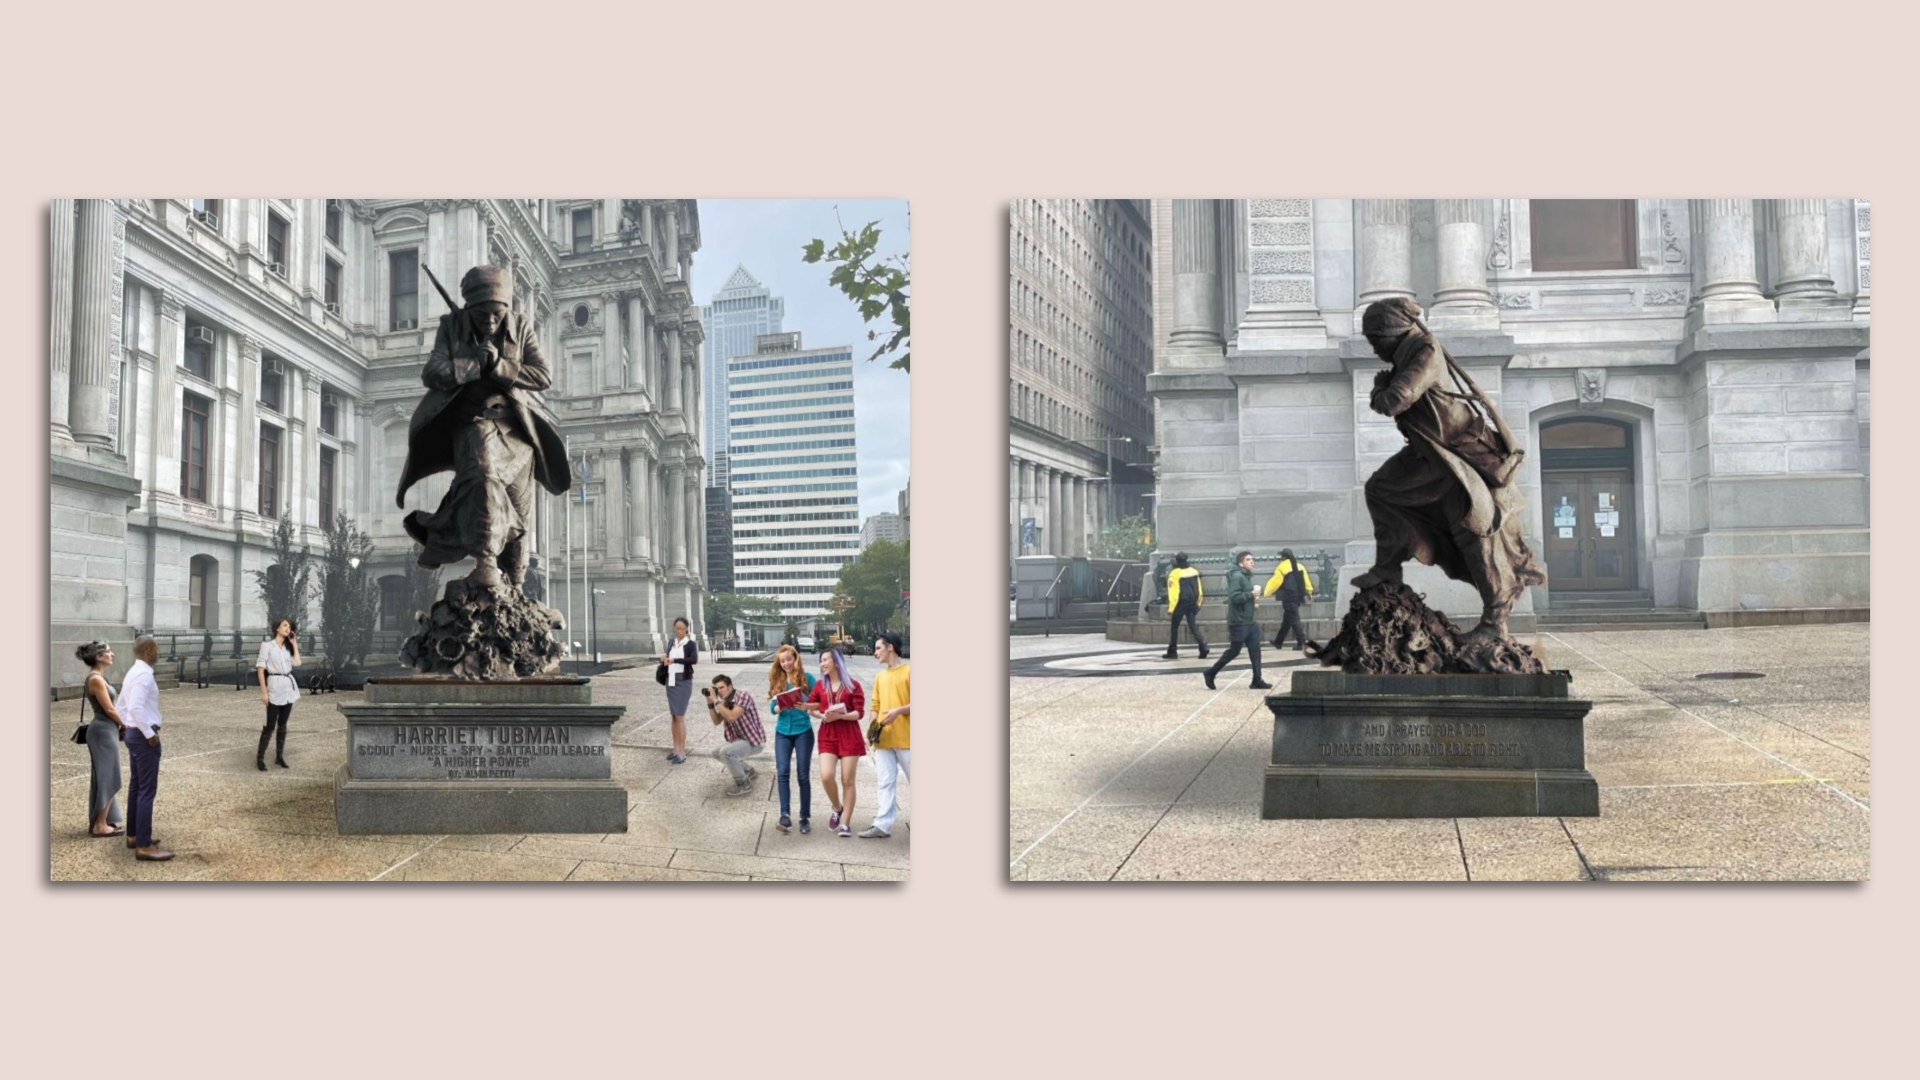 Renderings of Alvin Pettit's design of a Harriet Tubman statue — “A Higher Power: The Call of a Freedom Fighter” —